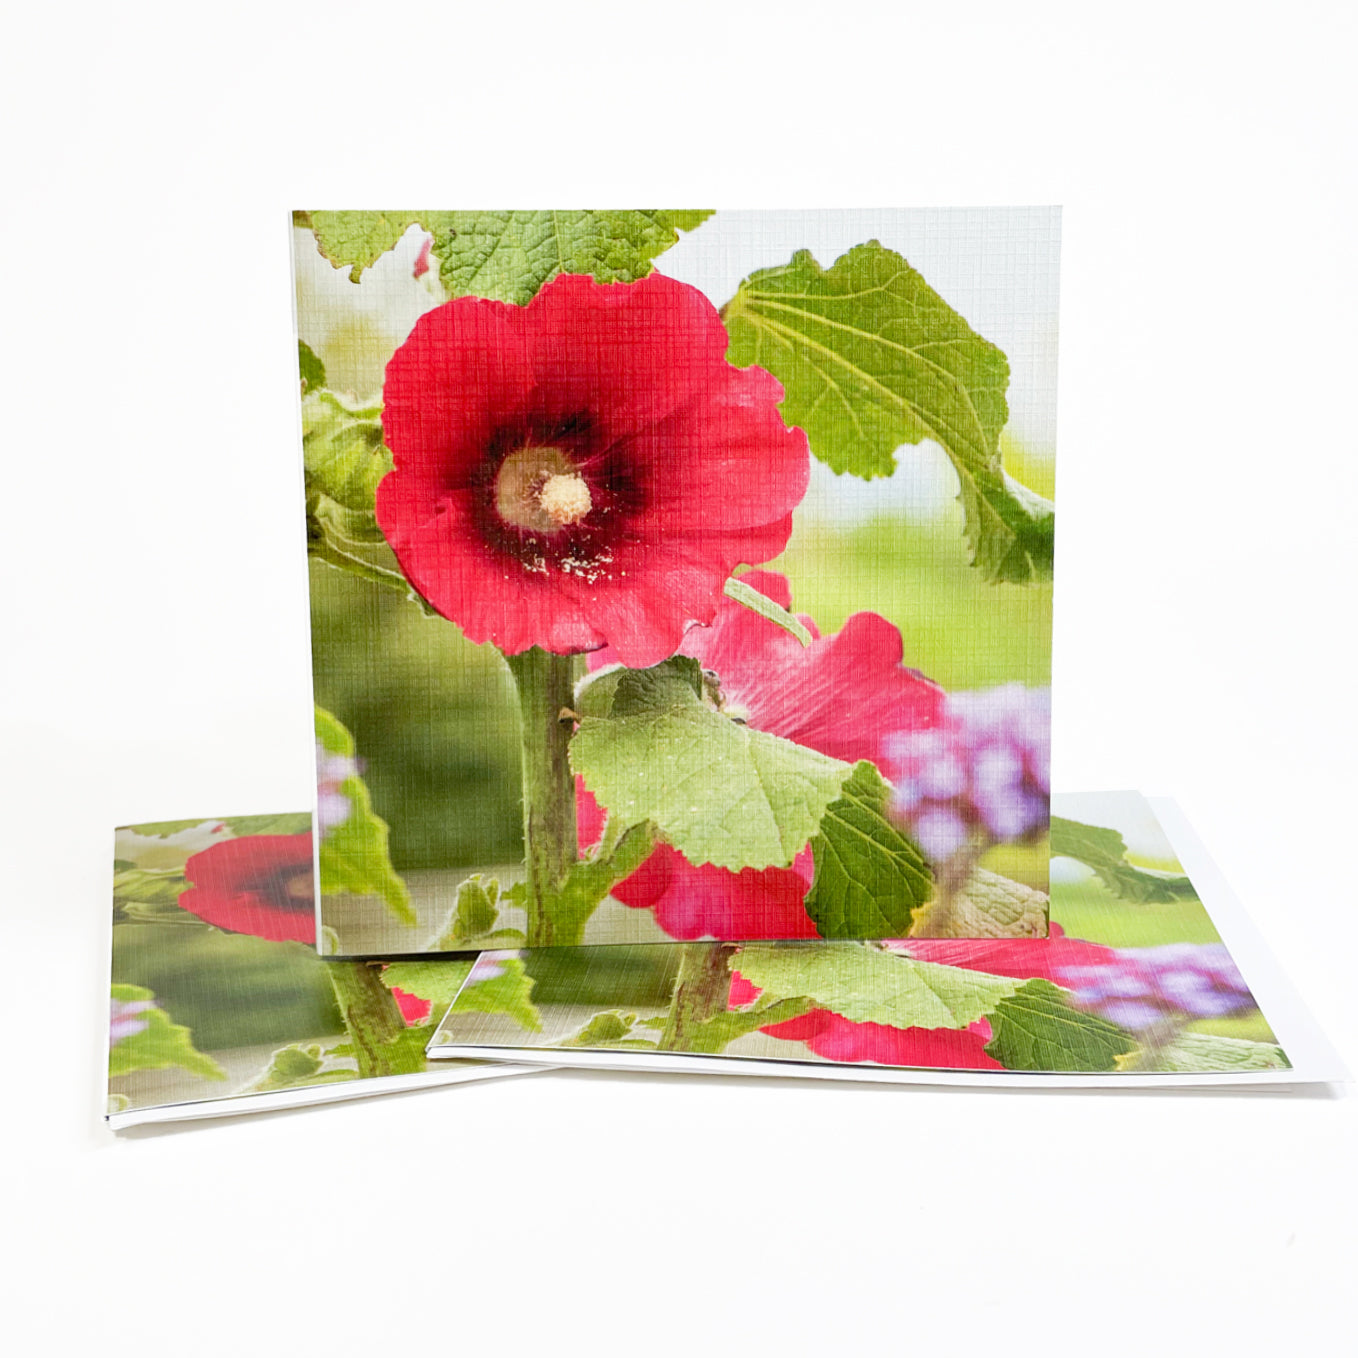 This lovely hollyhock standing tall by a picket fence in a cottage garden exemplifies the sense of timelessness visitors feel when visiting Mackinac Island, Michigan.  Open the card to observe an image of more of the mid-summer bloomers.  Hollyhocks are a symbol of ambition. Photography by Jennifer Wohletz.  The casually elegant card is meant to be shared or displayed as a work of art.  